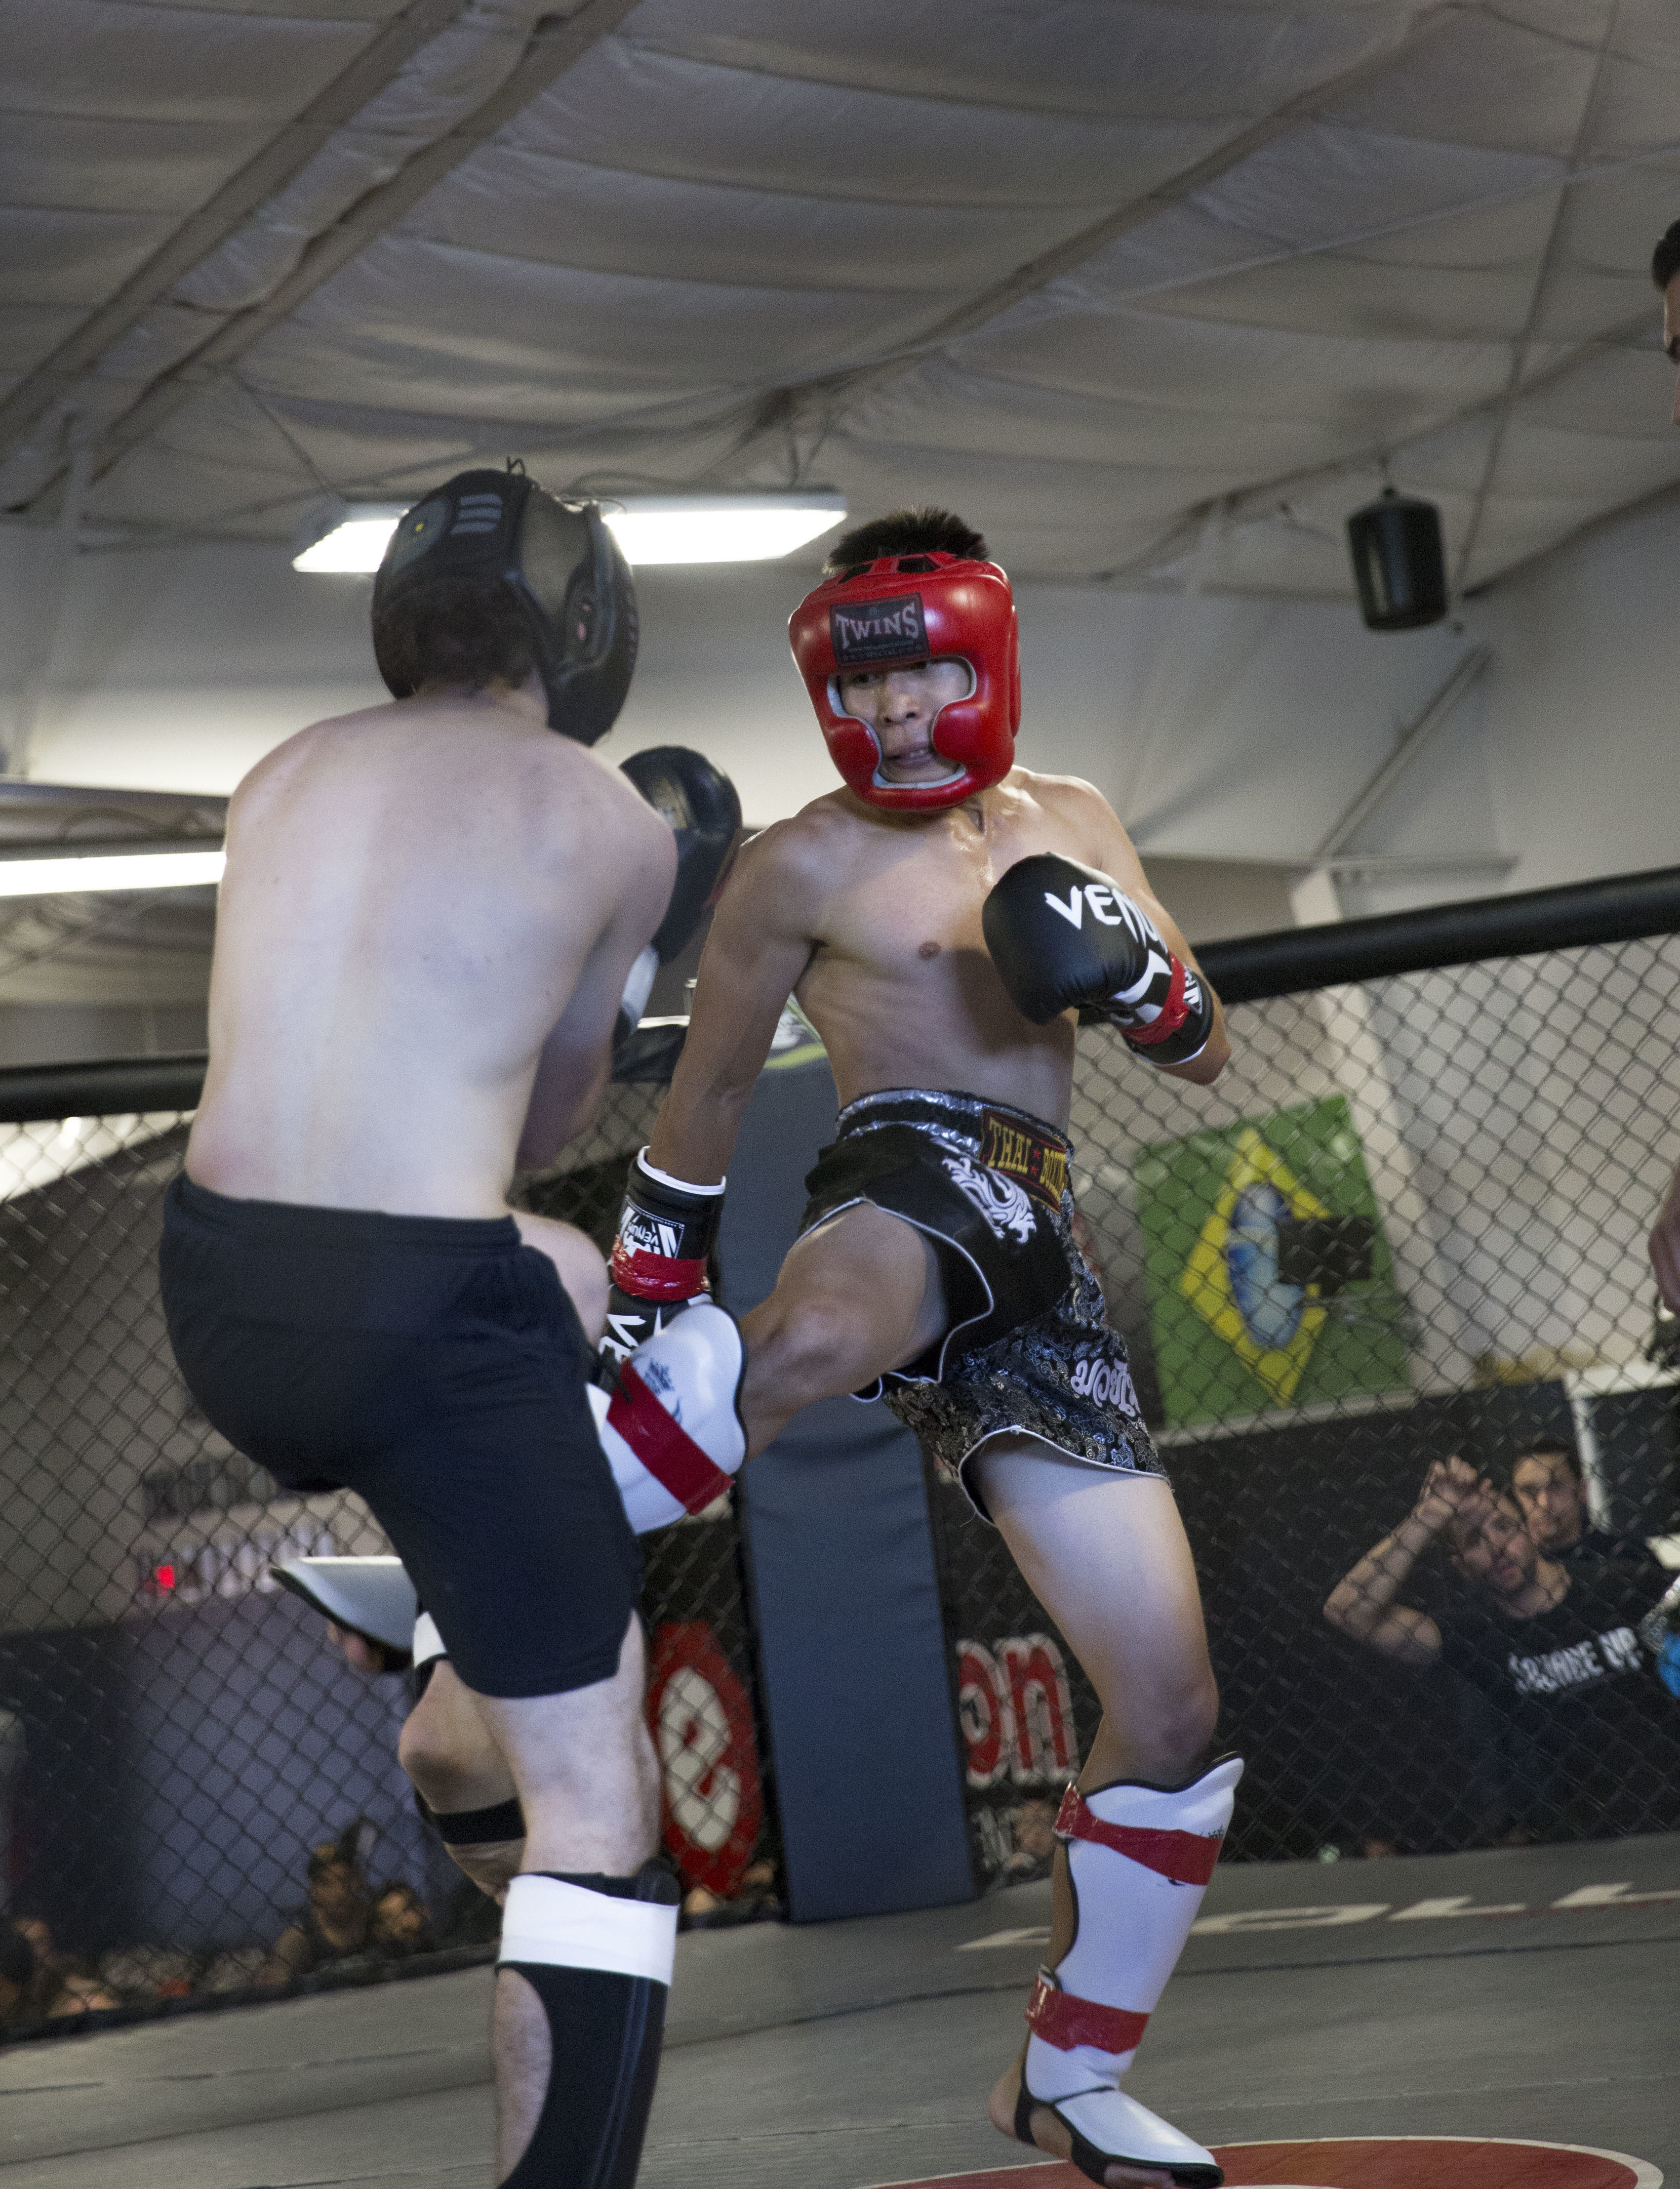 One man kicks another in a Muay Thai fight in the MMA cage at Easton Training Center Denver.